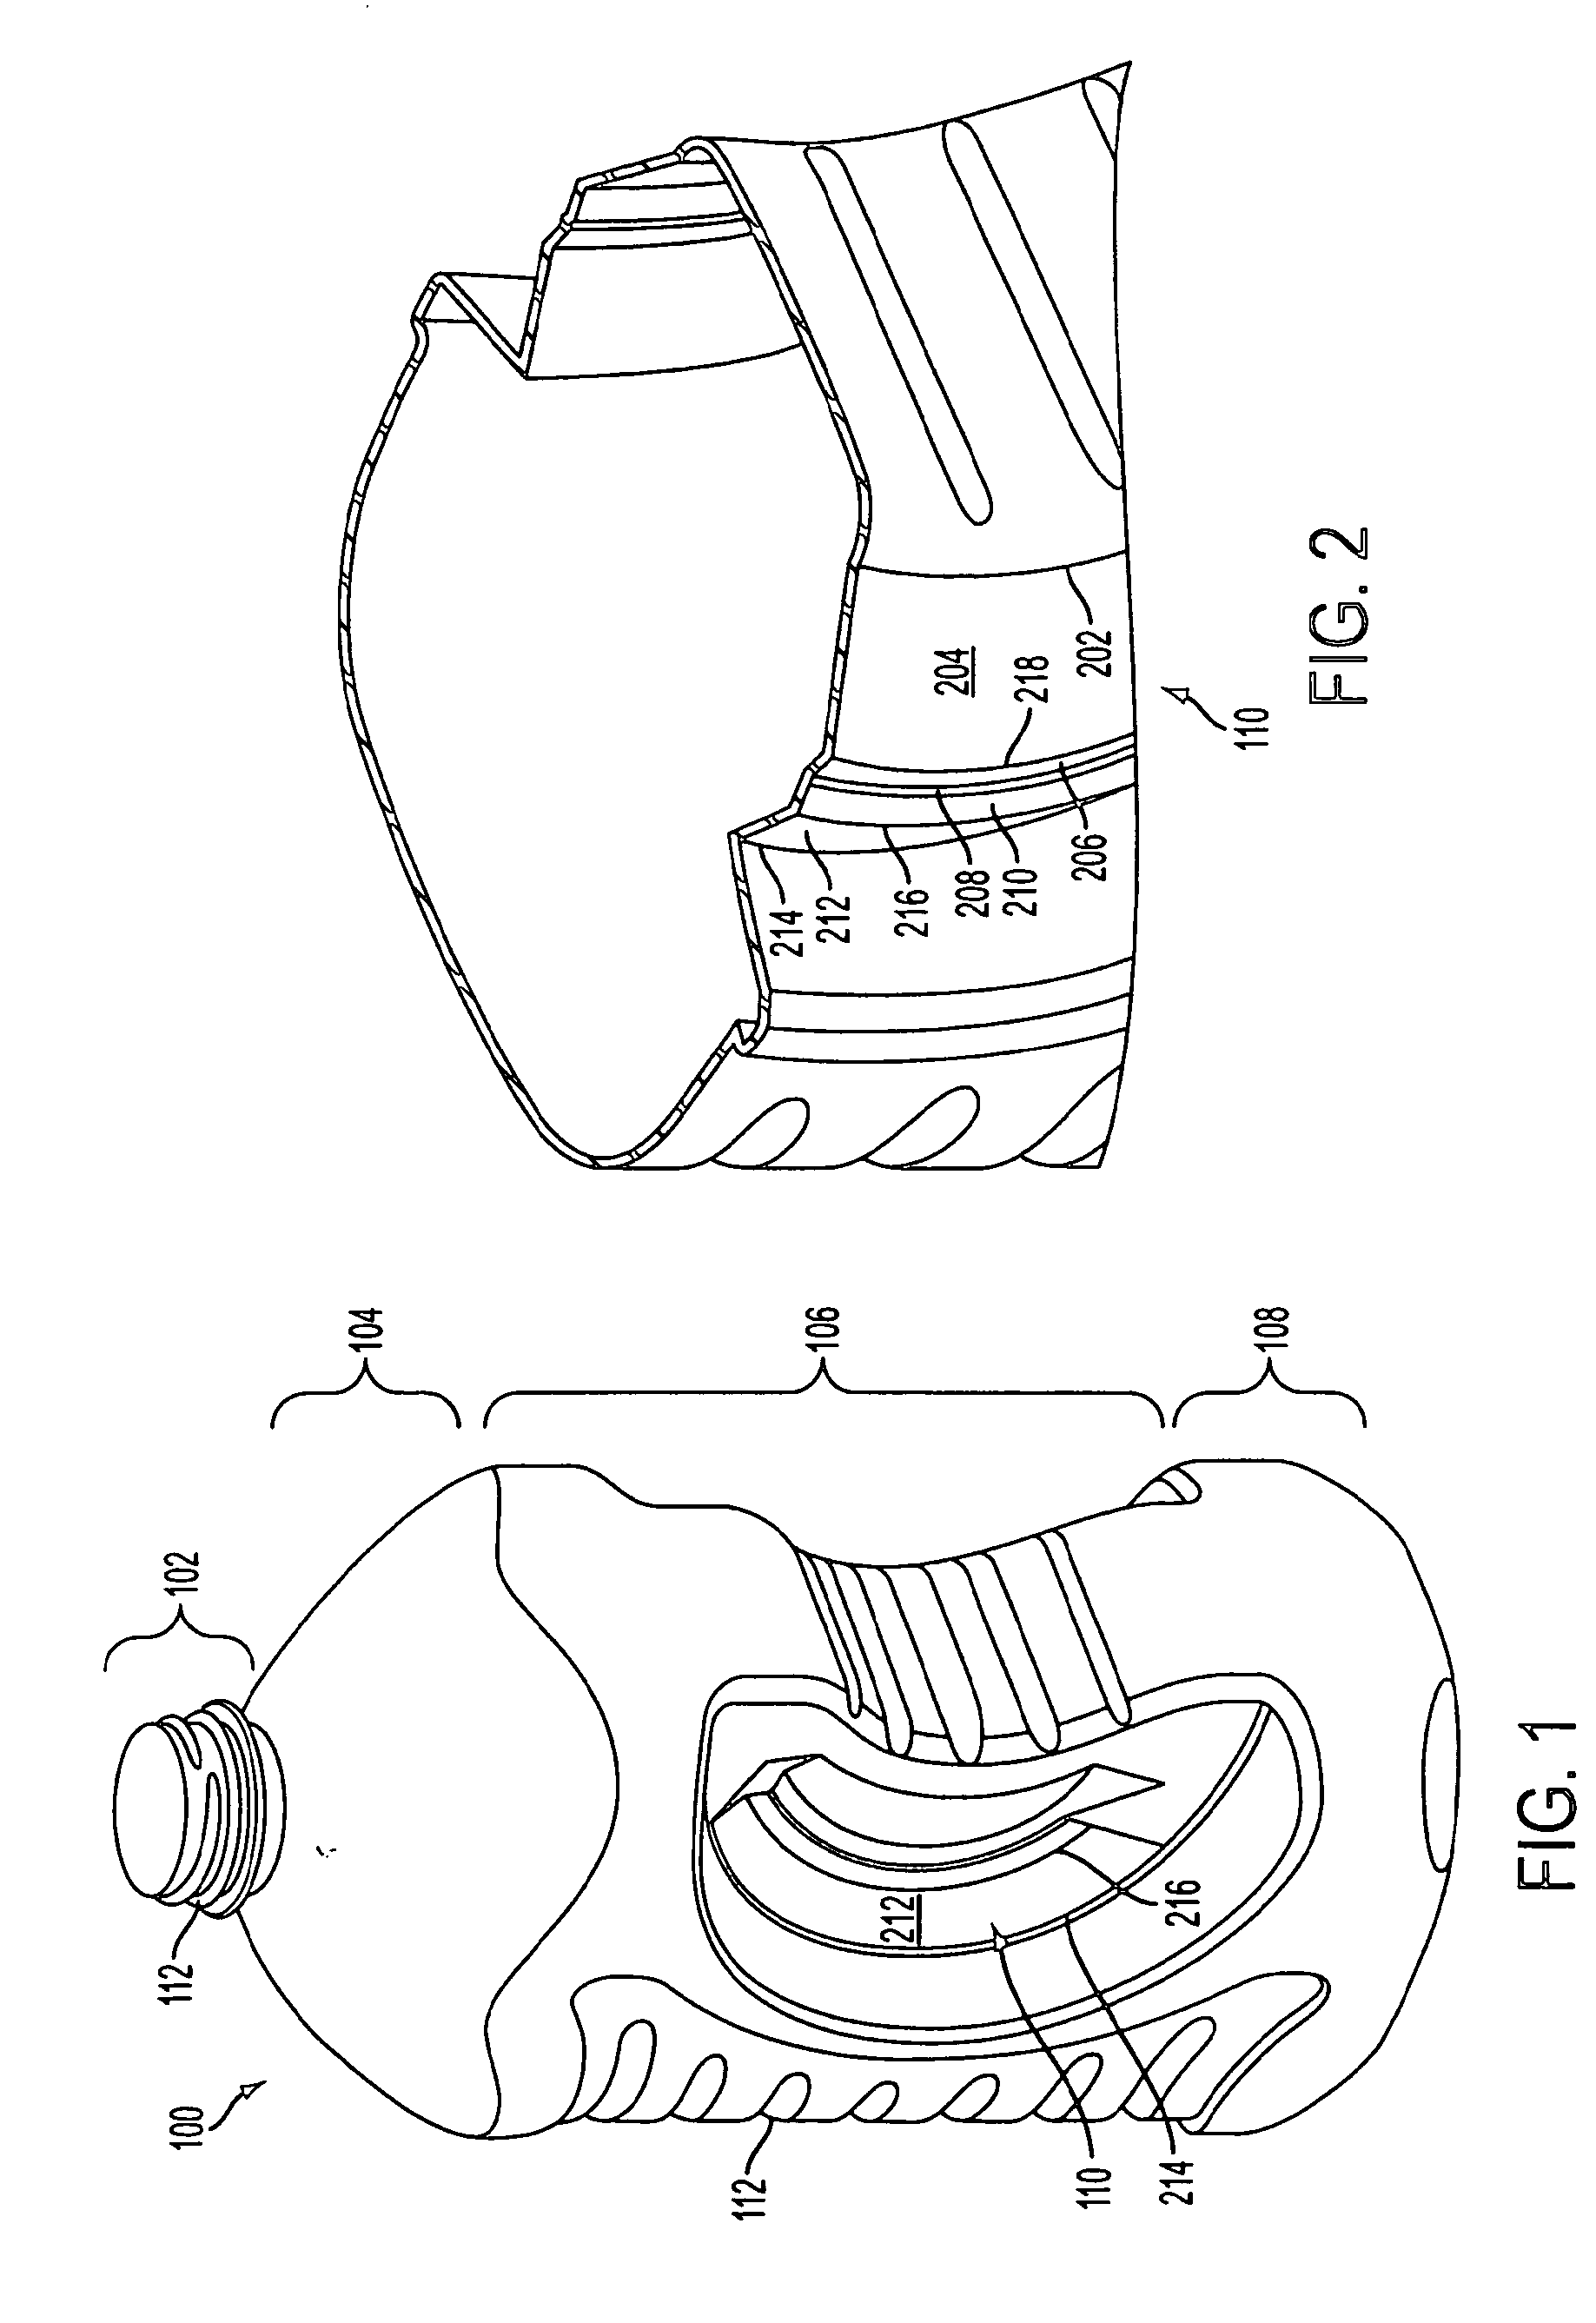 Method of Forming Container